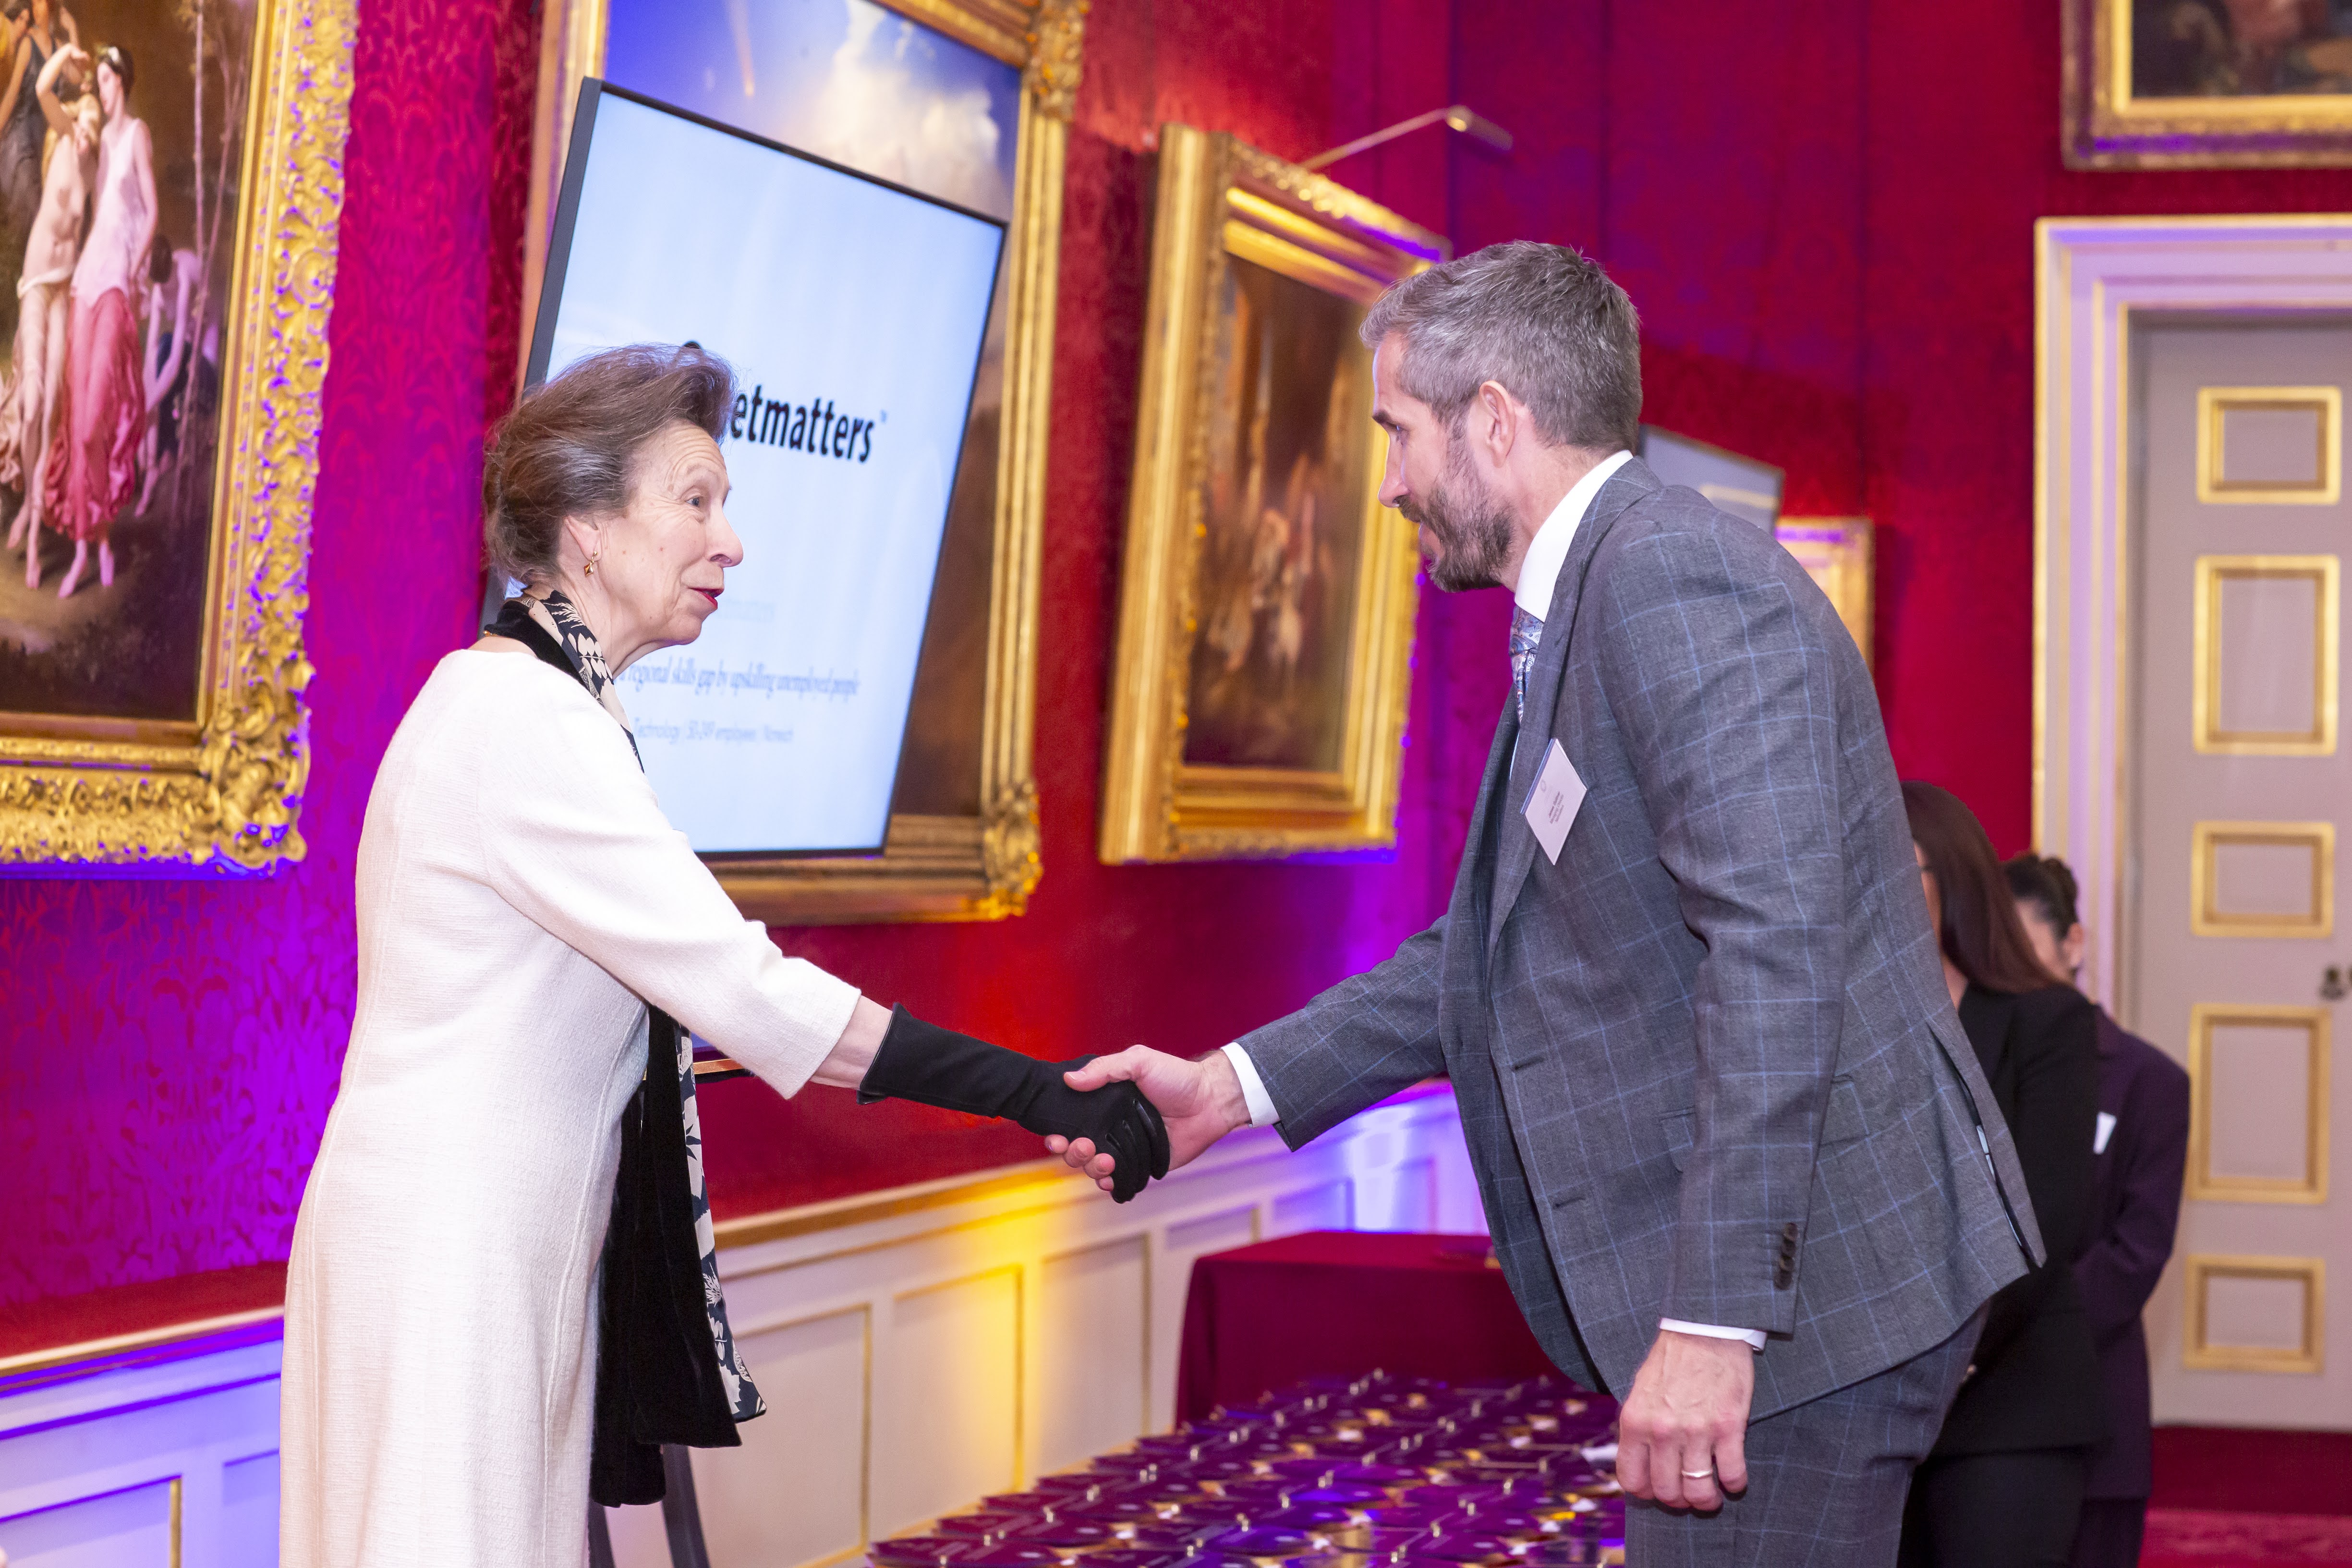 Our director meeting Princess Anne.